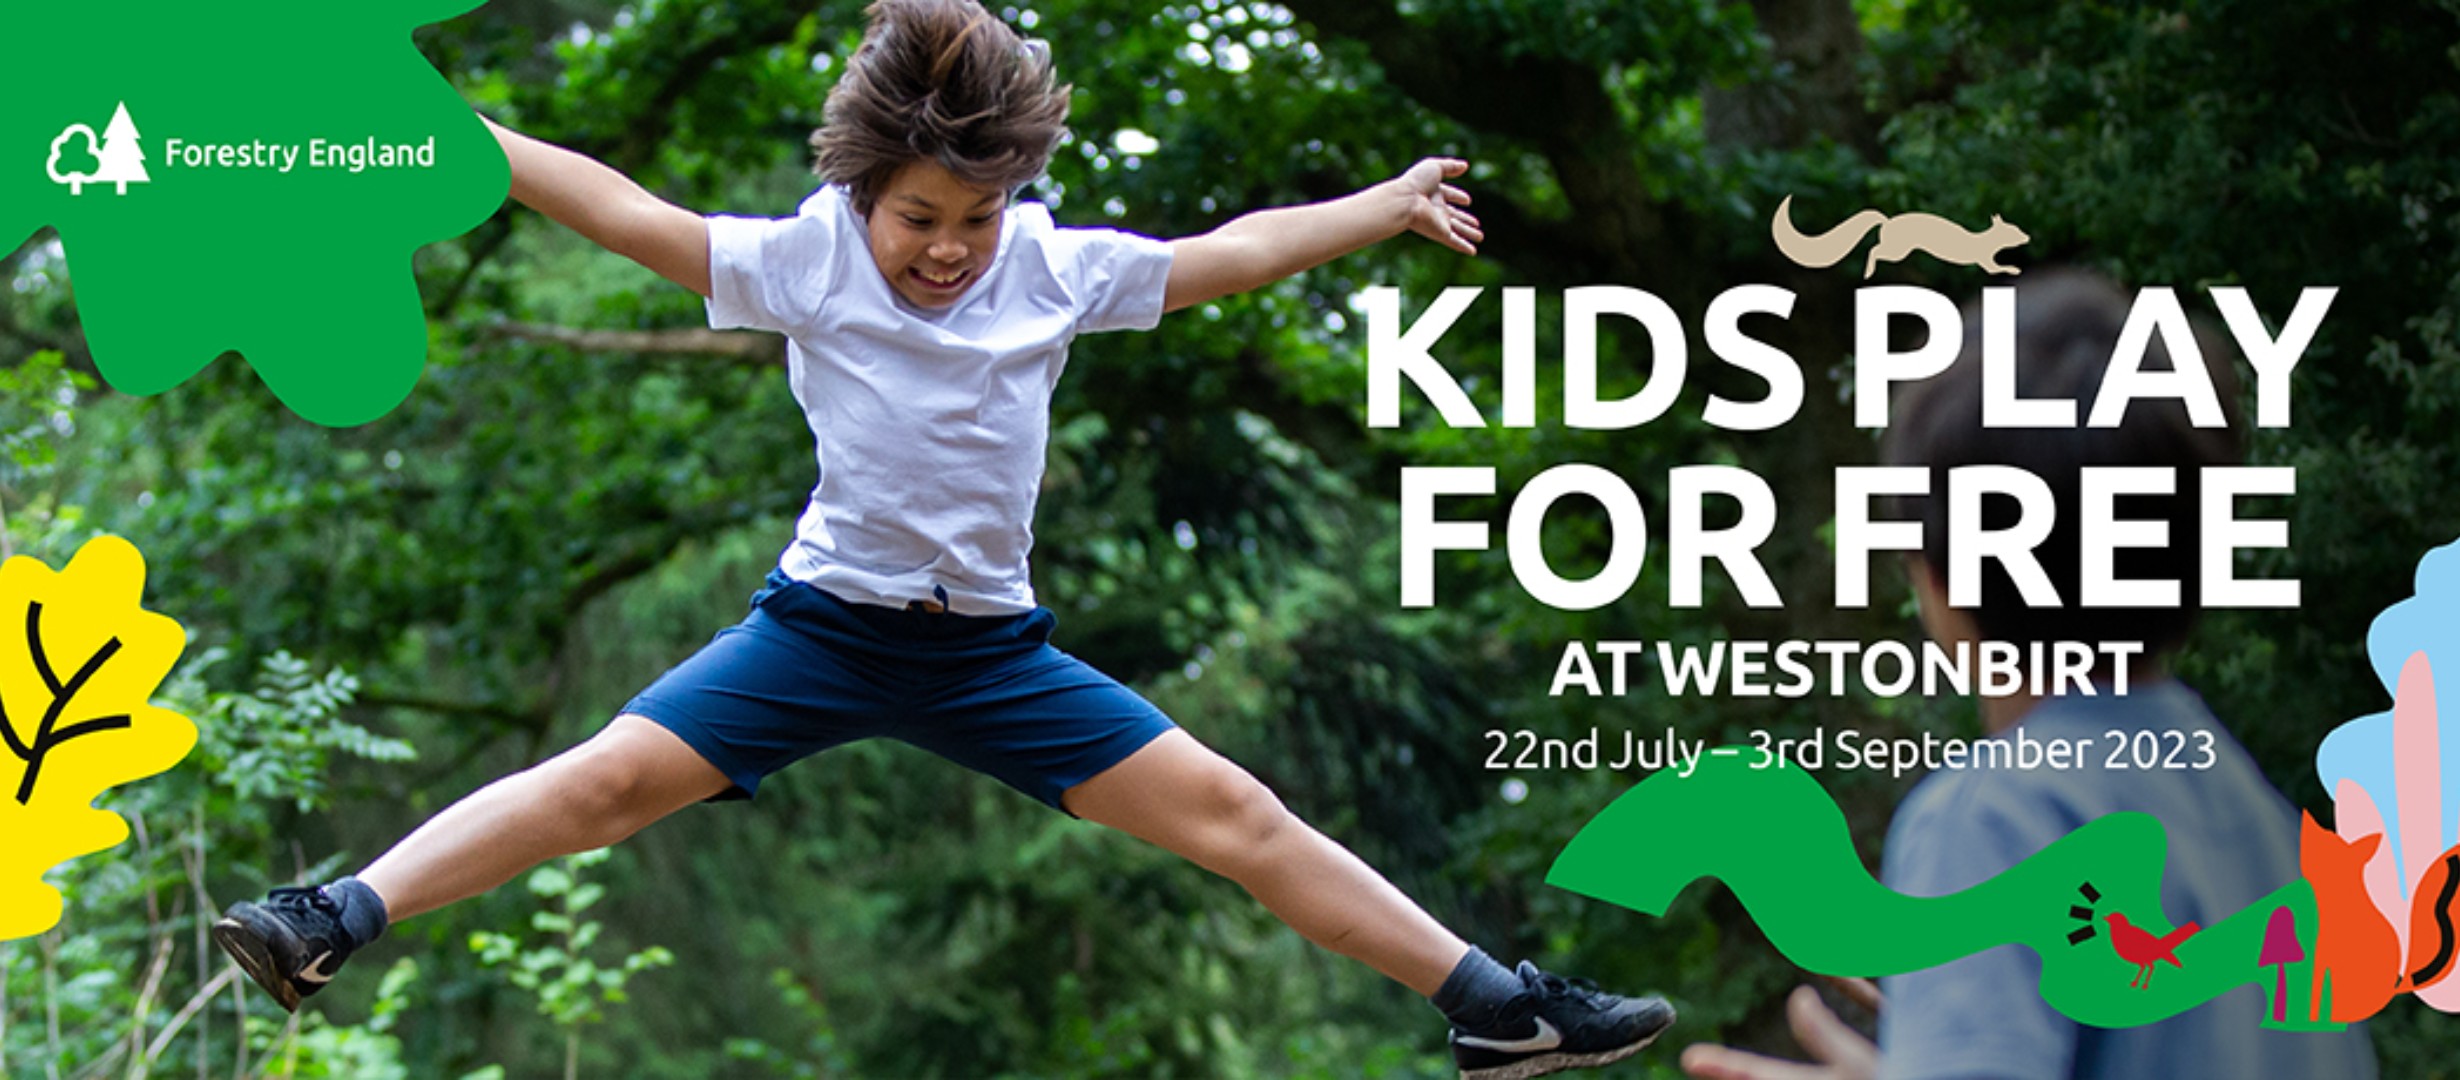 Forestry England Kids Play for Free at Westonbirt 22nd July to 3rd September 